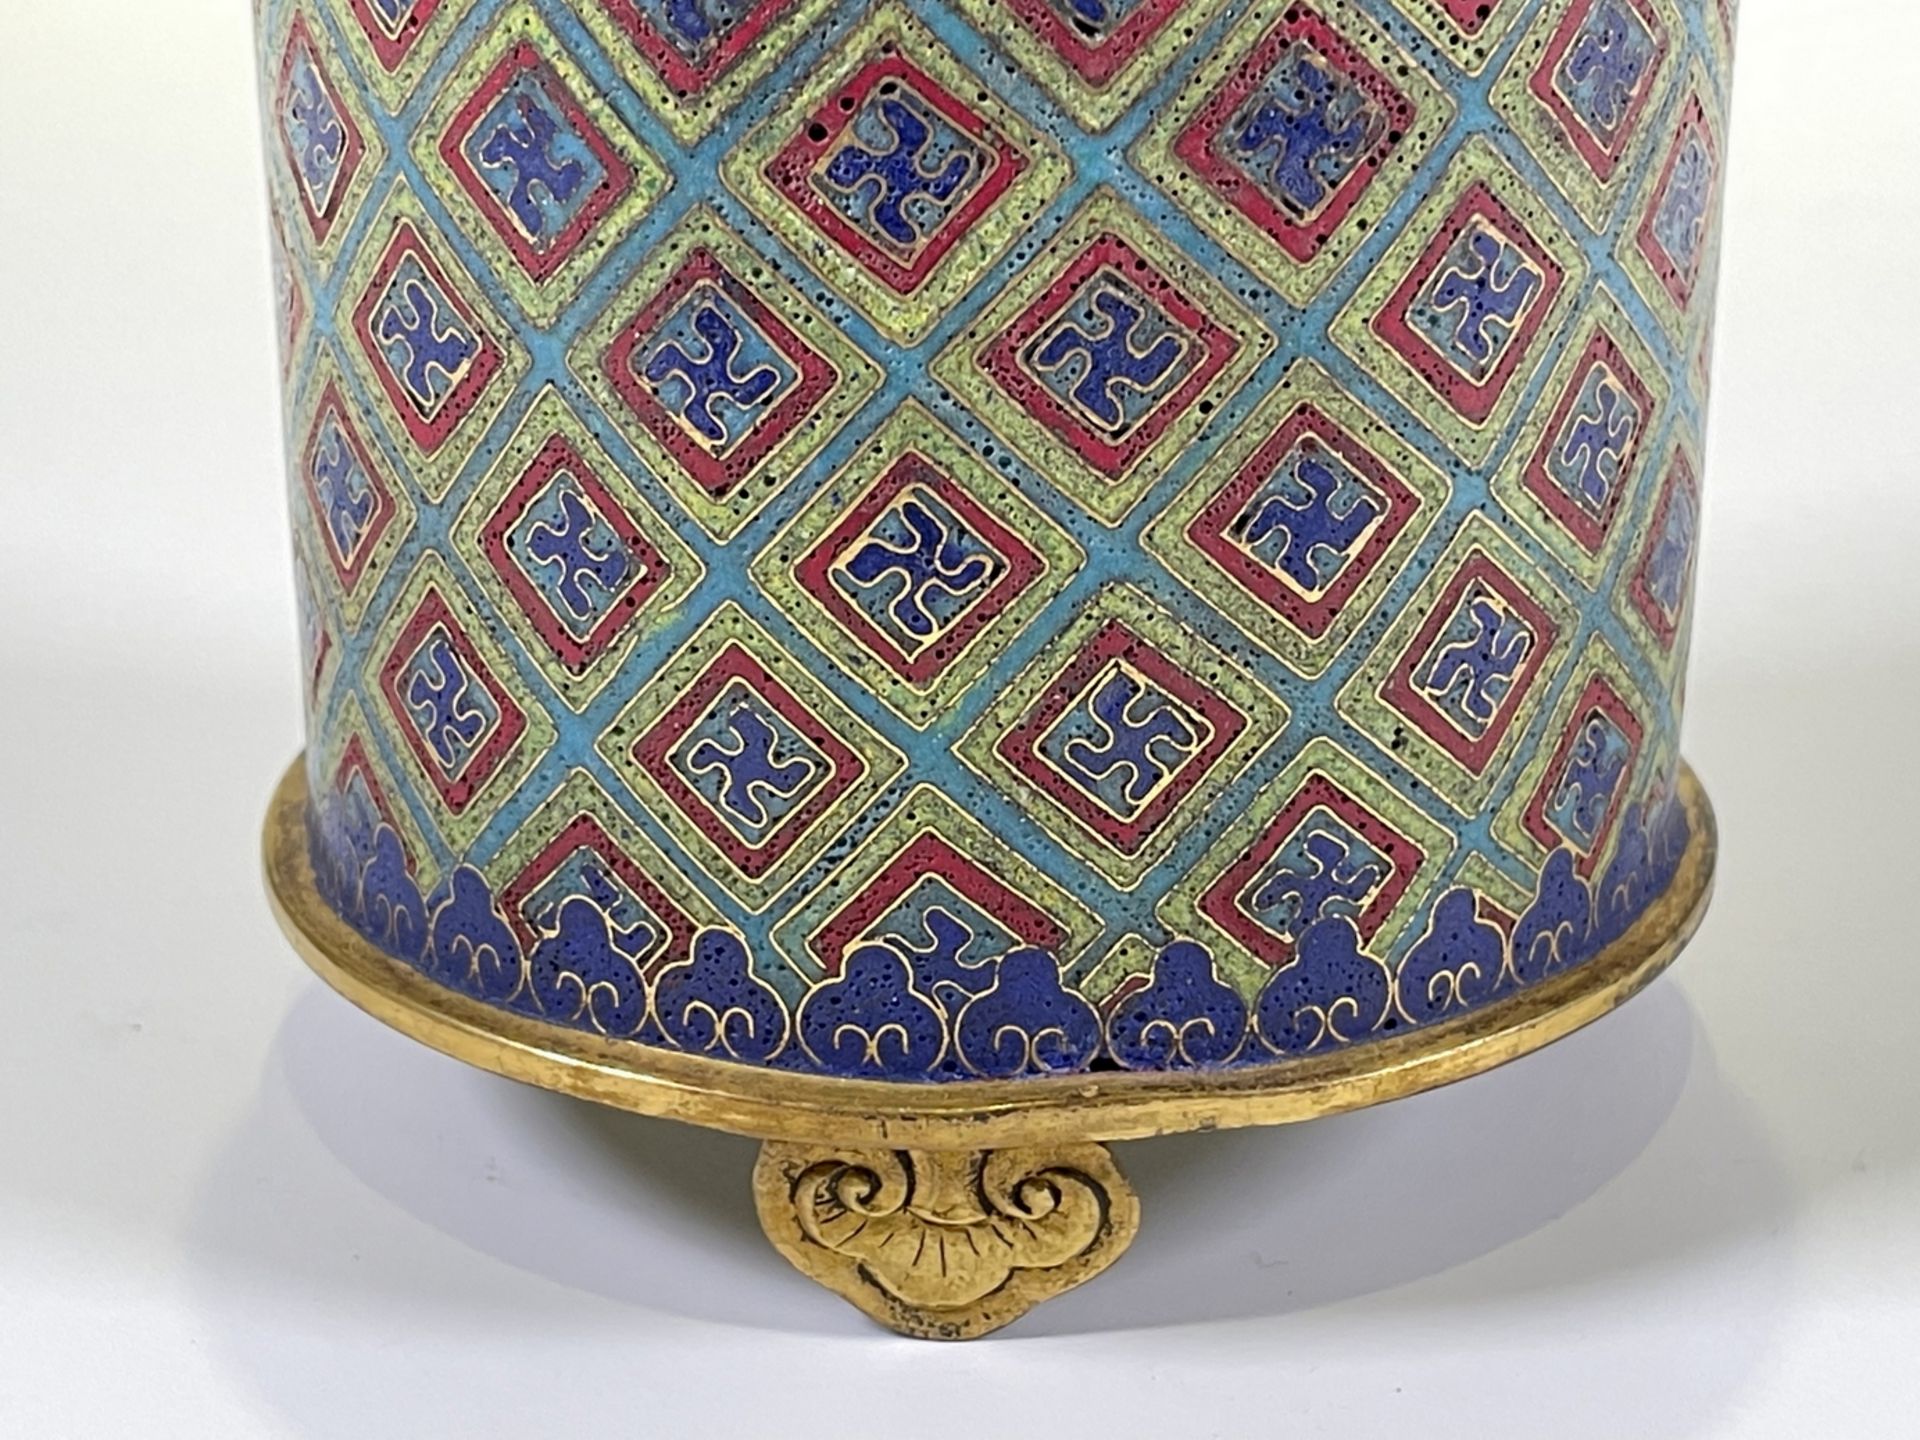 FINE CHINESE CLOISONNE, 18TH/19TH Century Pr. Collection of NARA private gallary.  - Image 11 of 11